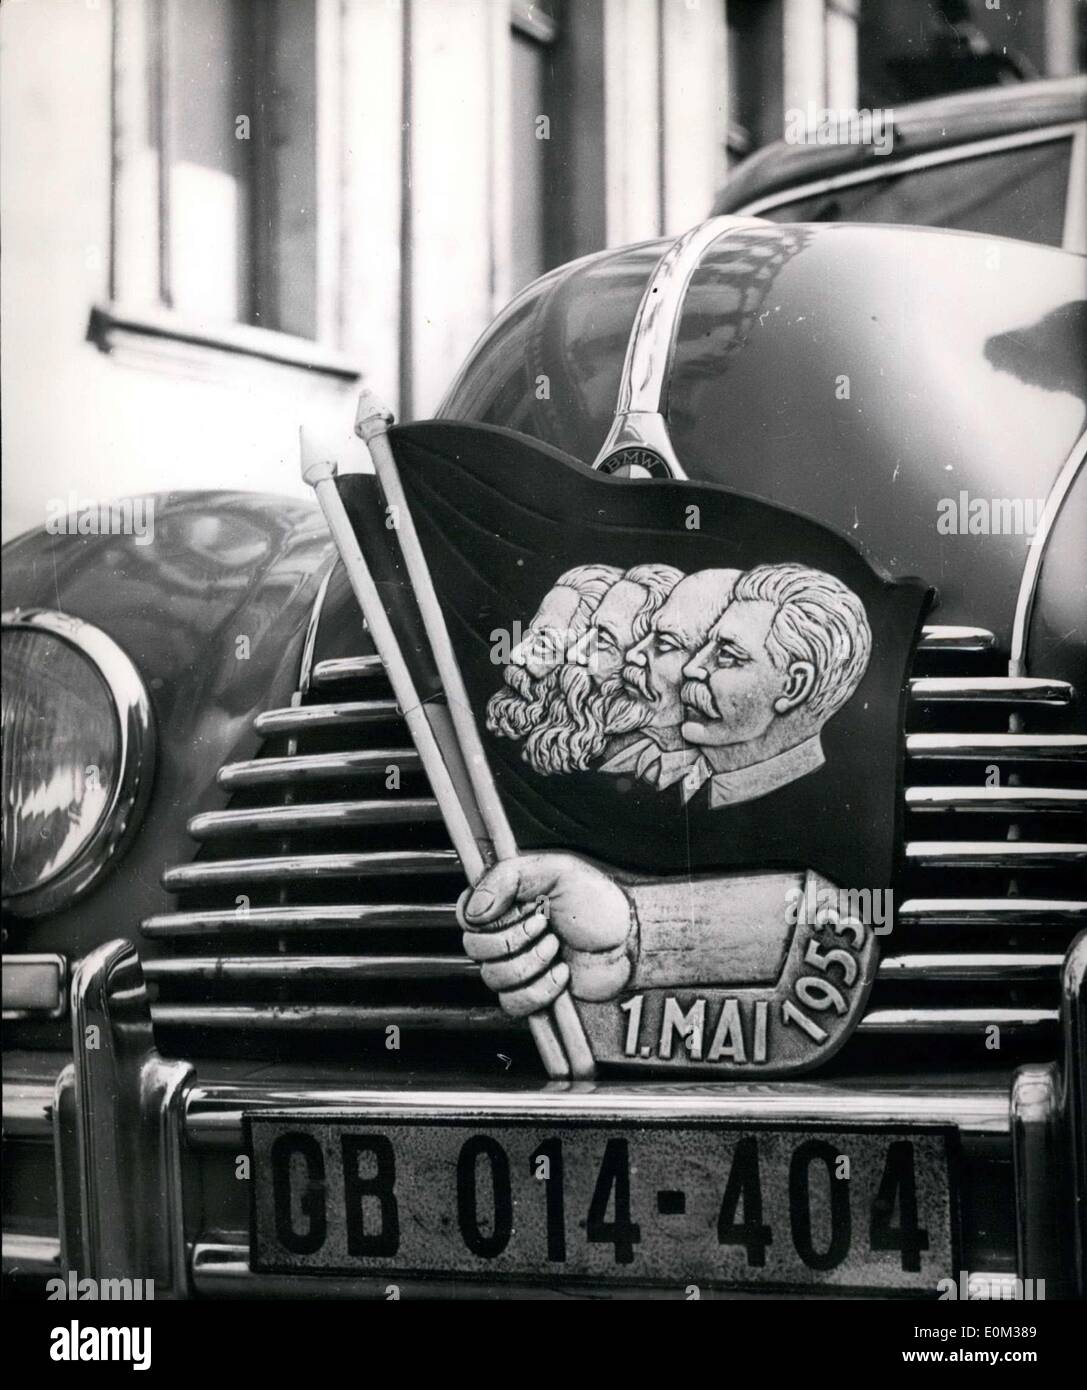 Apr. 29, 1953 - Nearly every car in East Germany was decorated with these badges, or plaques, adorned with the heads of the ''fathers of socialism'': Stalin, Lenin, Marx, and Engels. Stock Photo